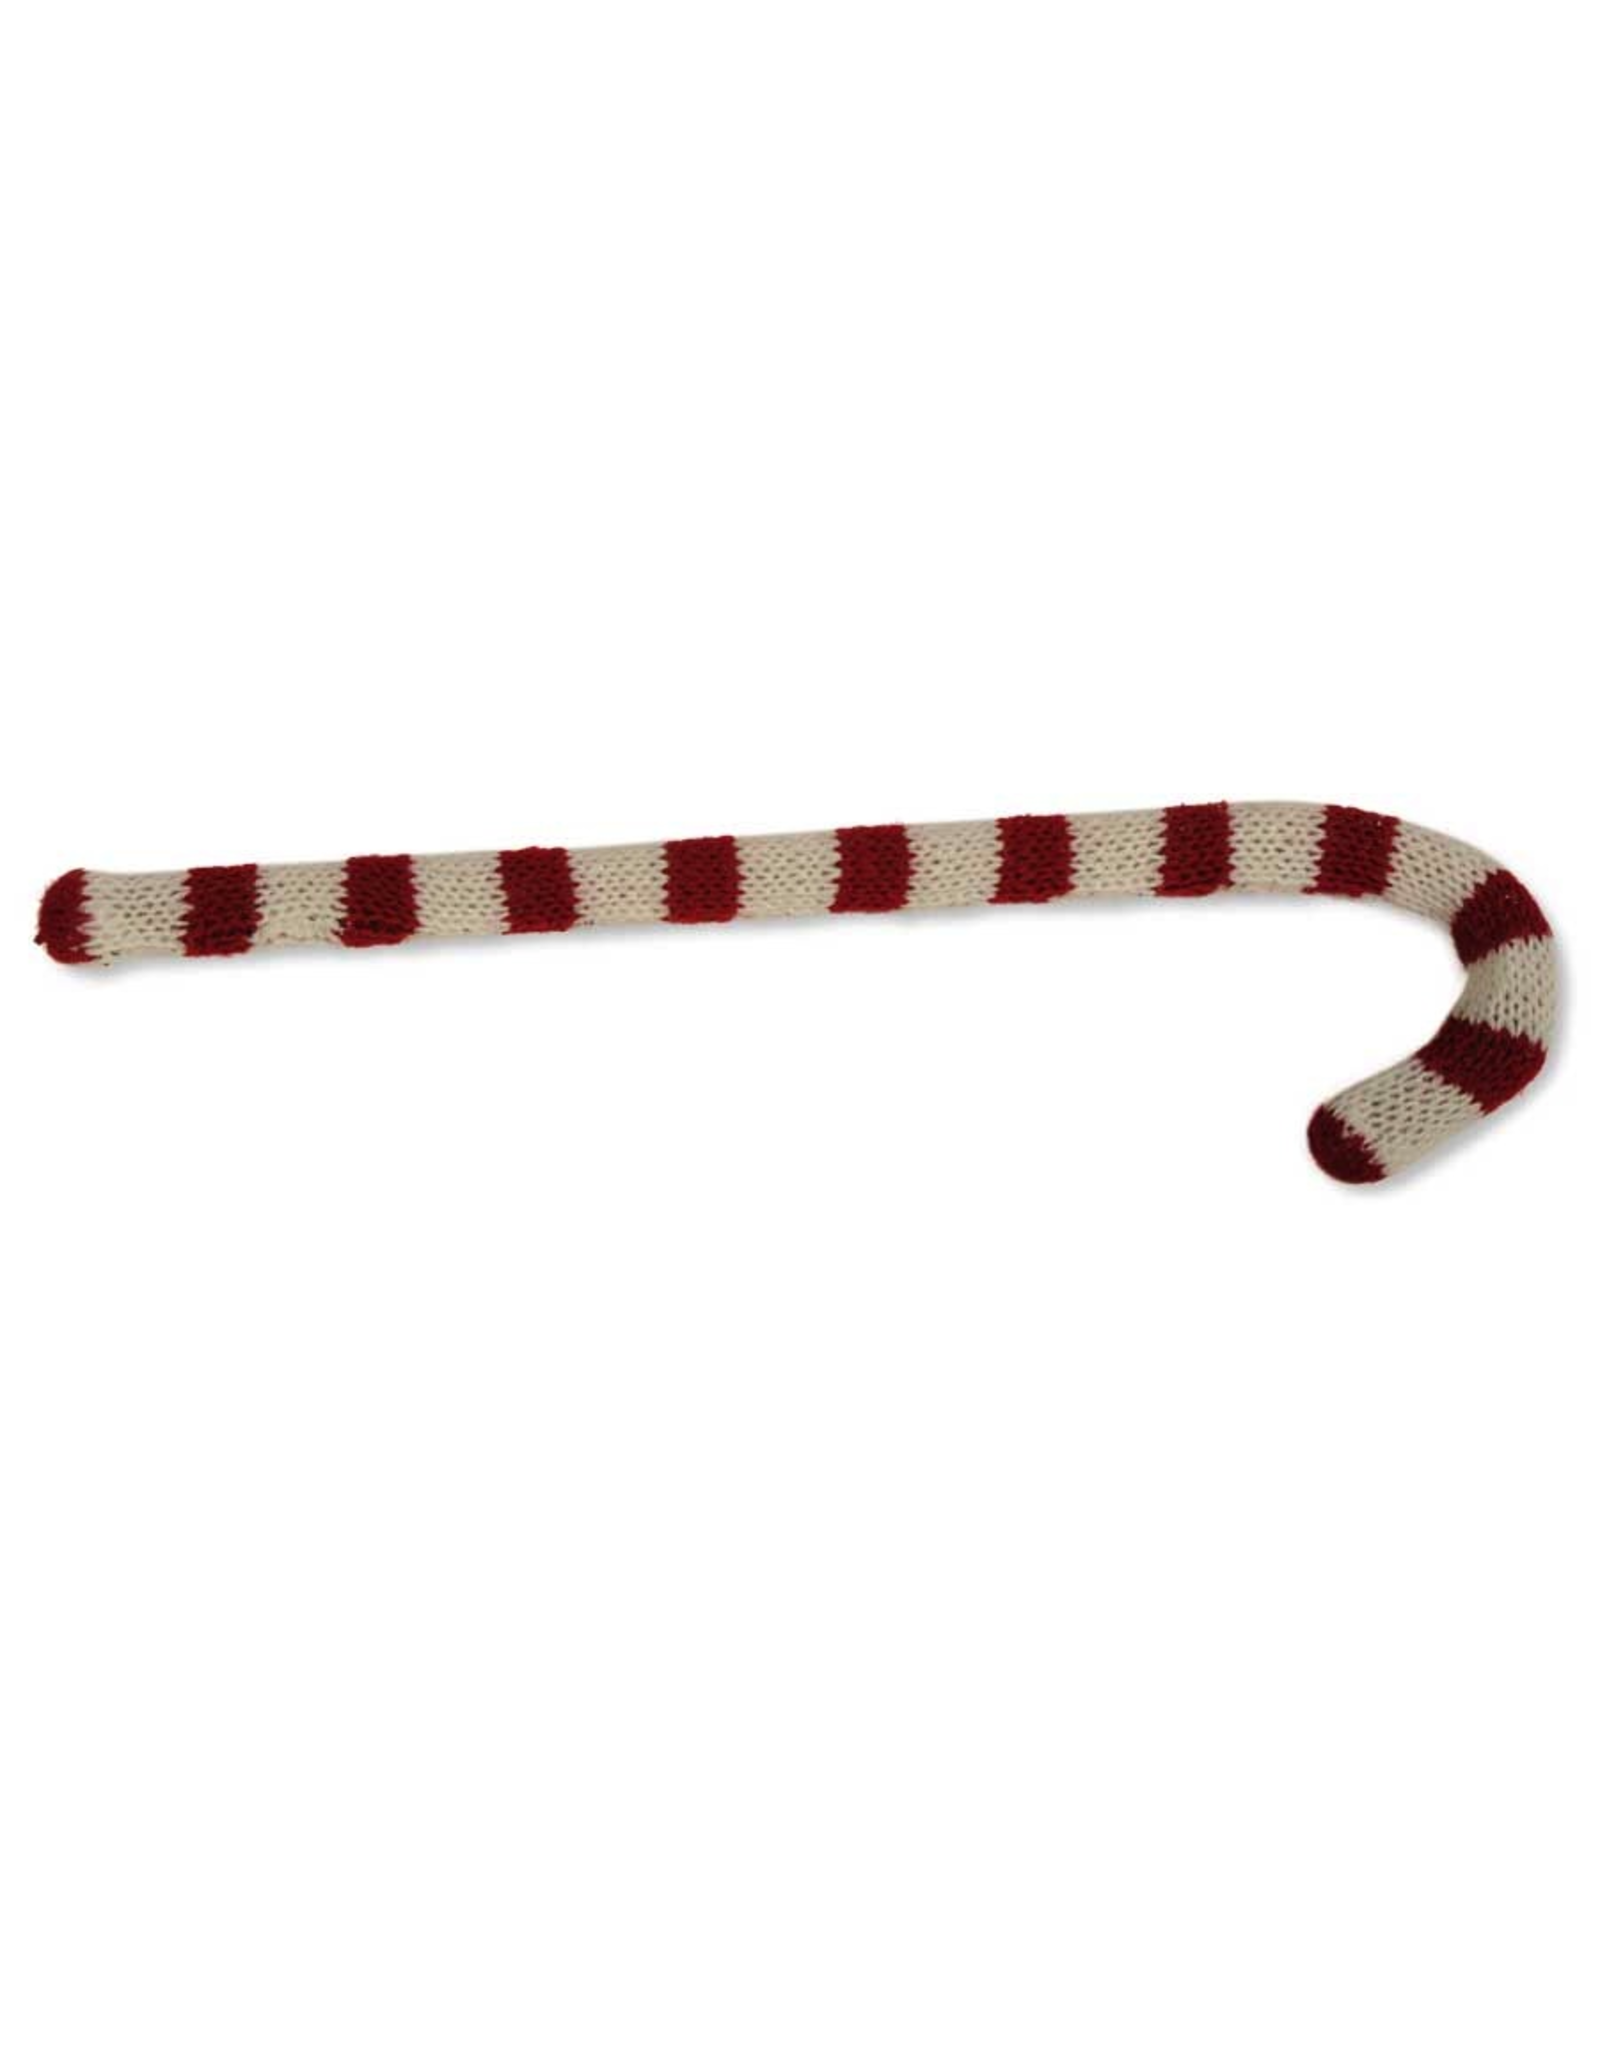 K&K Interiors Knitted Yarn Candy Cane 11 Inch Christmas Decoration